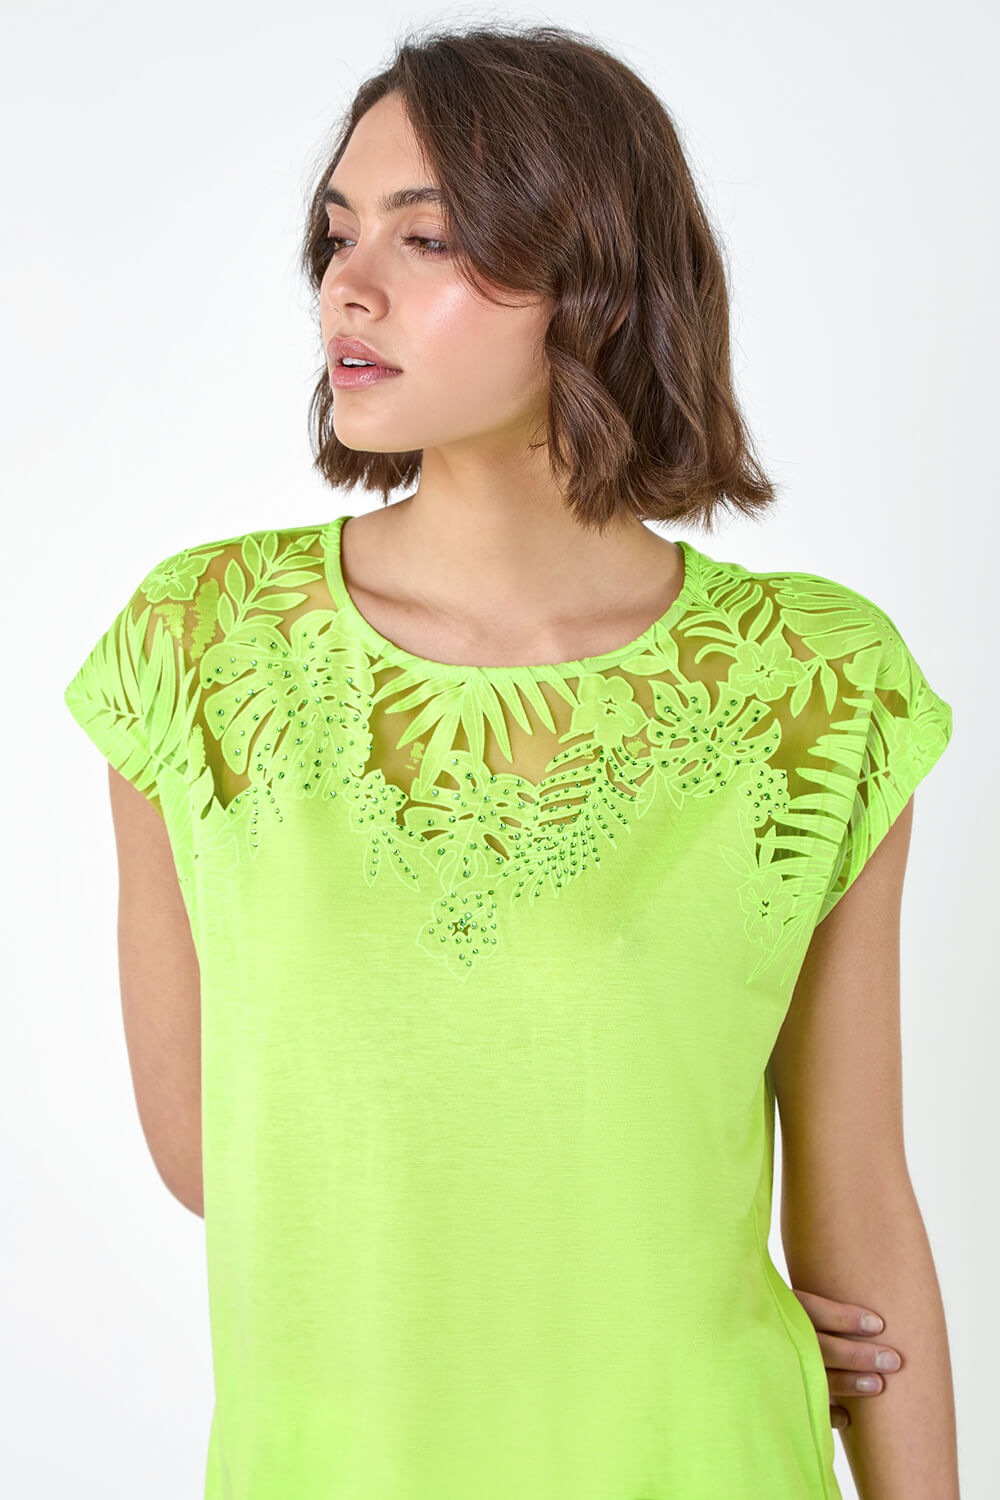 Lime Embellished Palm Print Cut Out T-Shirt, Image 4 of 5